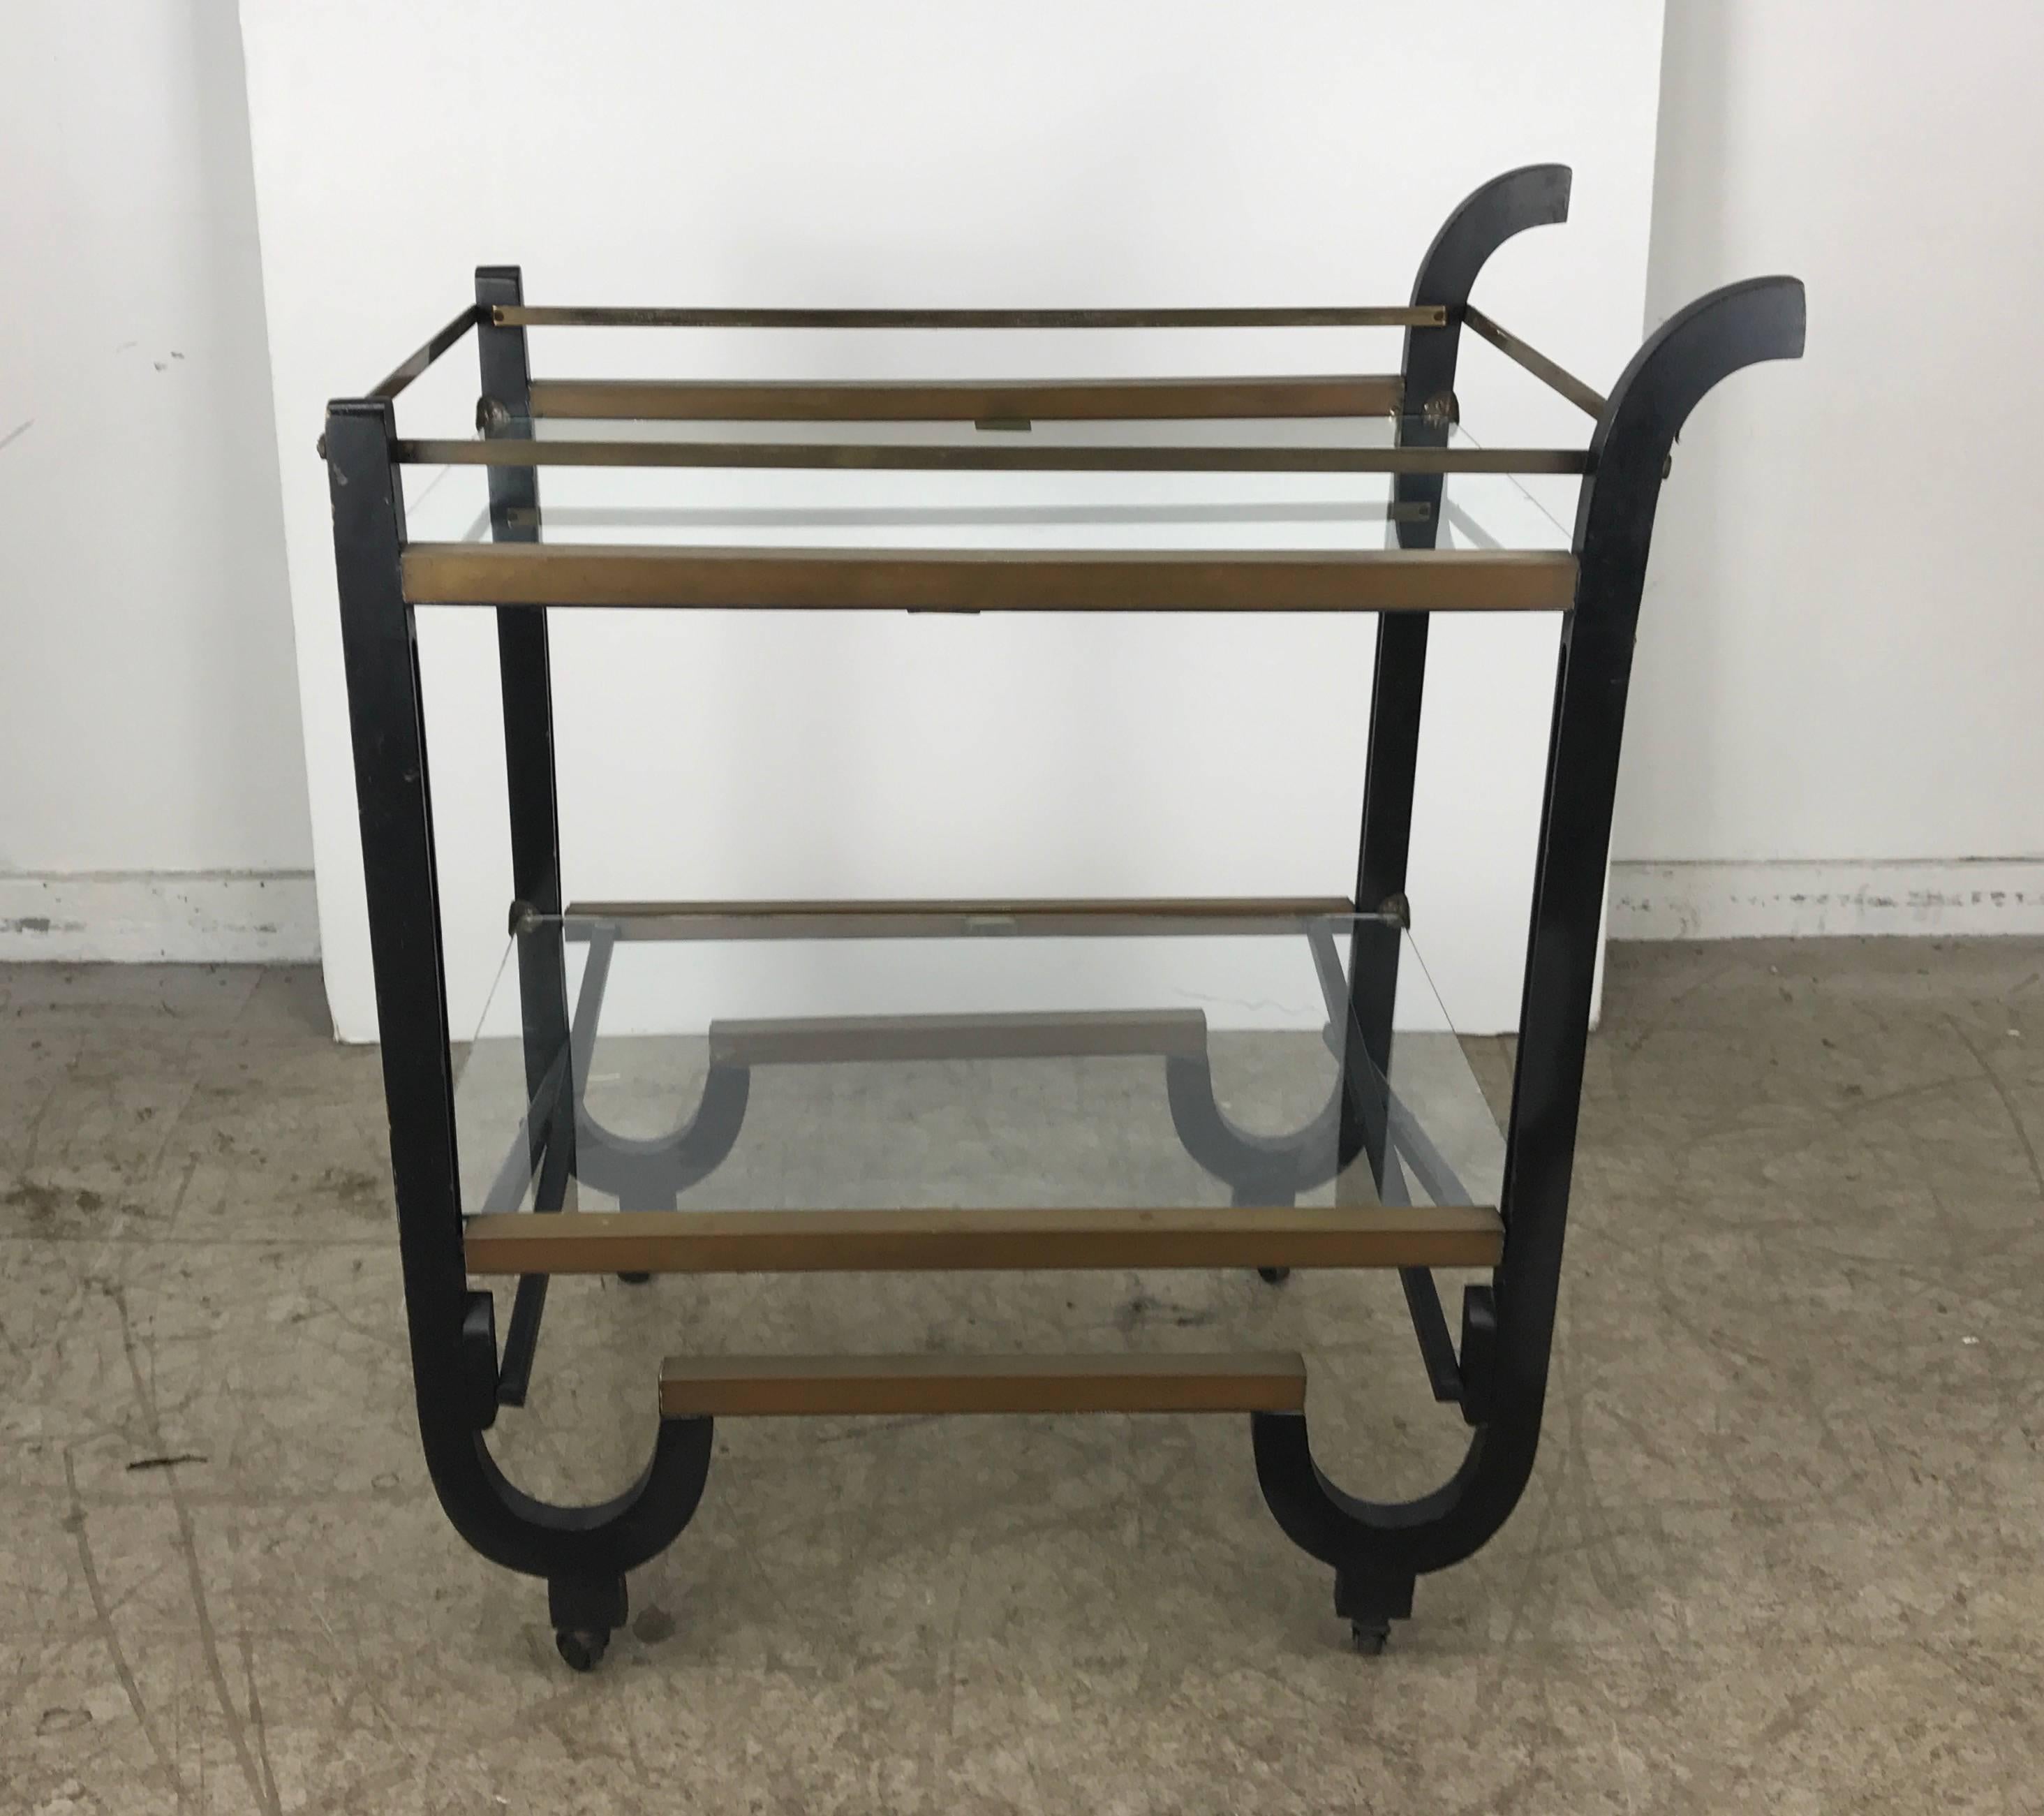 Stunning Art Deco brass and black lacquer bar or tea cart, attributed to Donald Deskey.

Sleek, Classic Deco design. Lacquered wood brass trim detailing and glass shelves. Collapsible construction for convenient storage as needed.